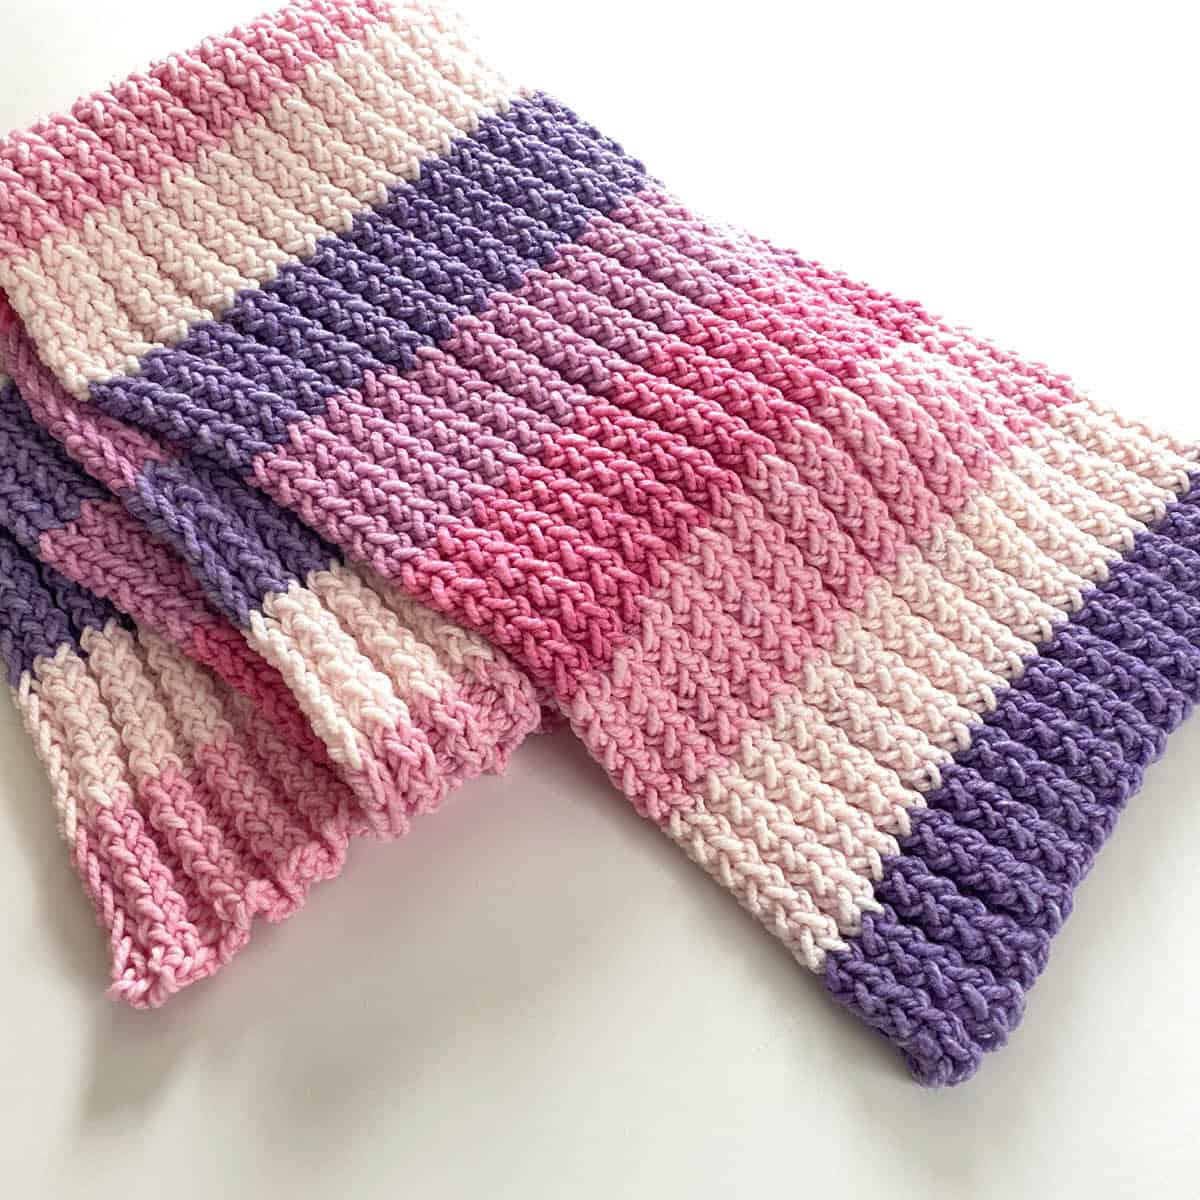 Loom Knit Stretchy Comfort Wrap: The Perfect DIY Project